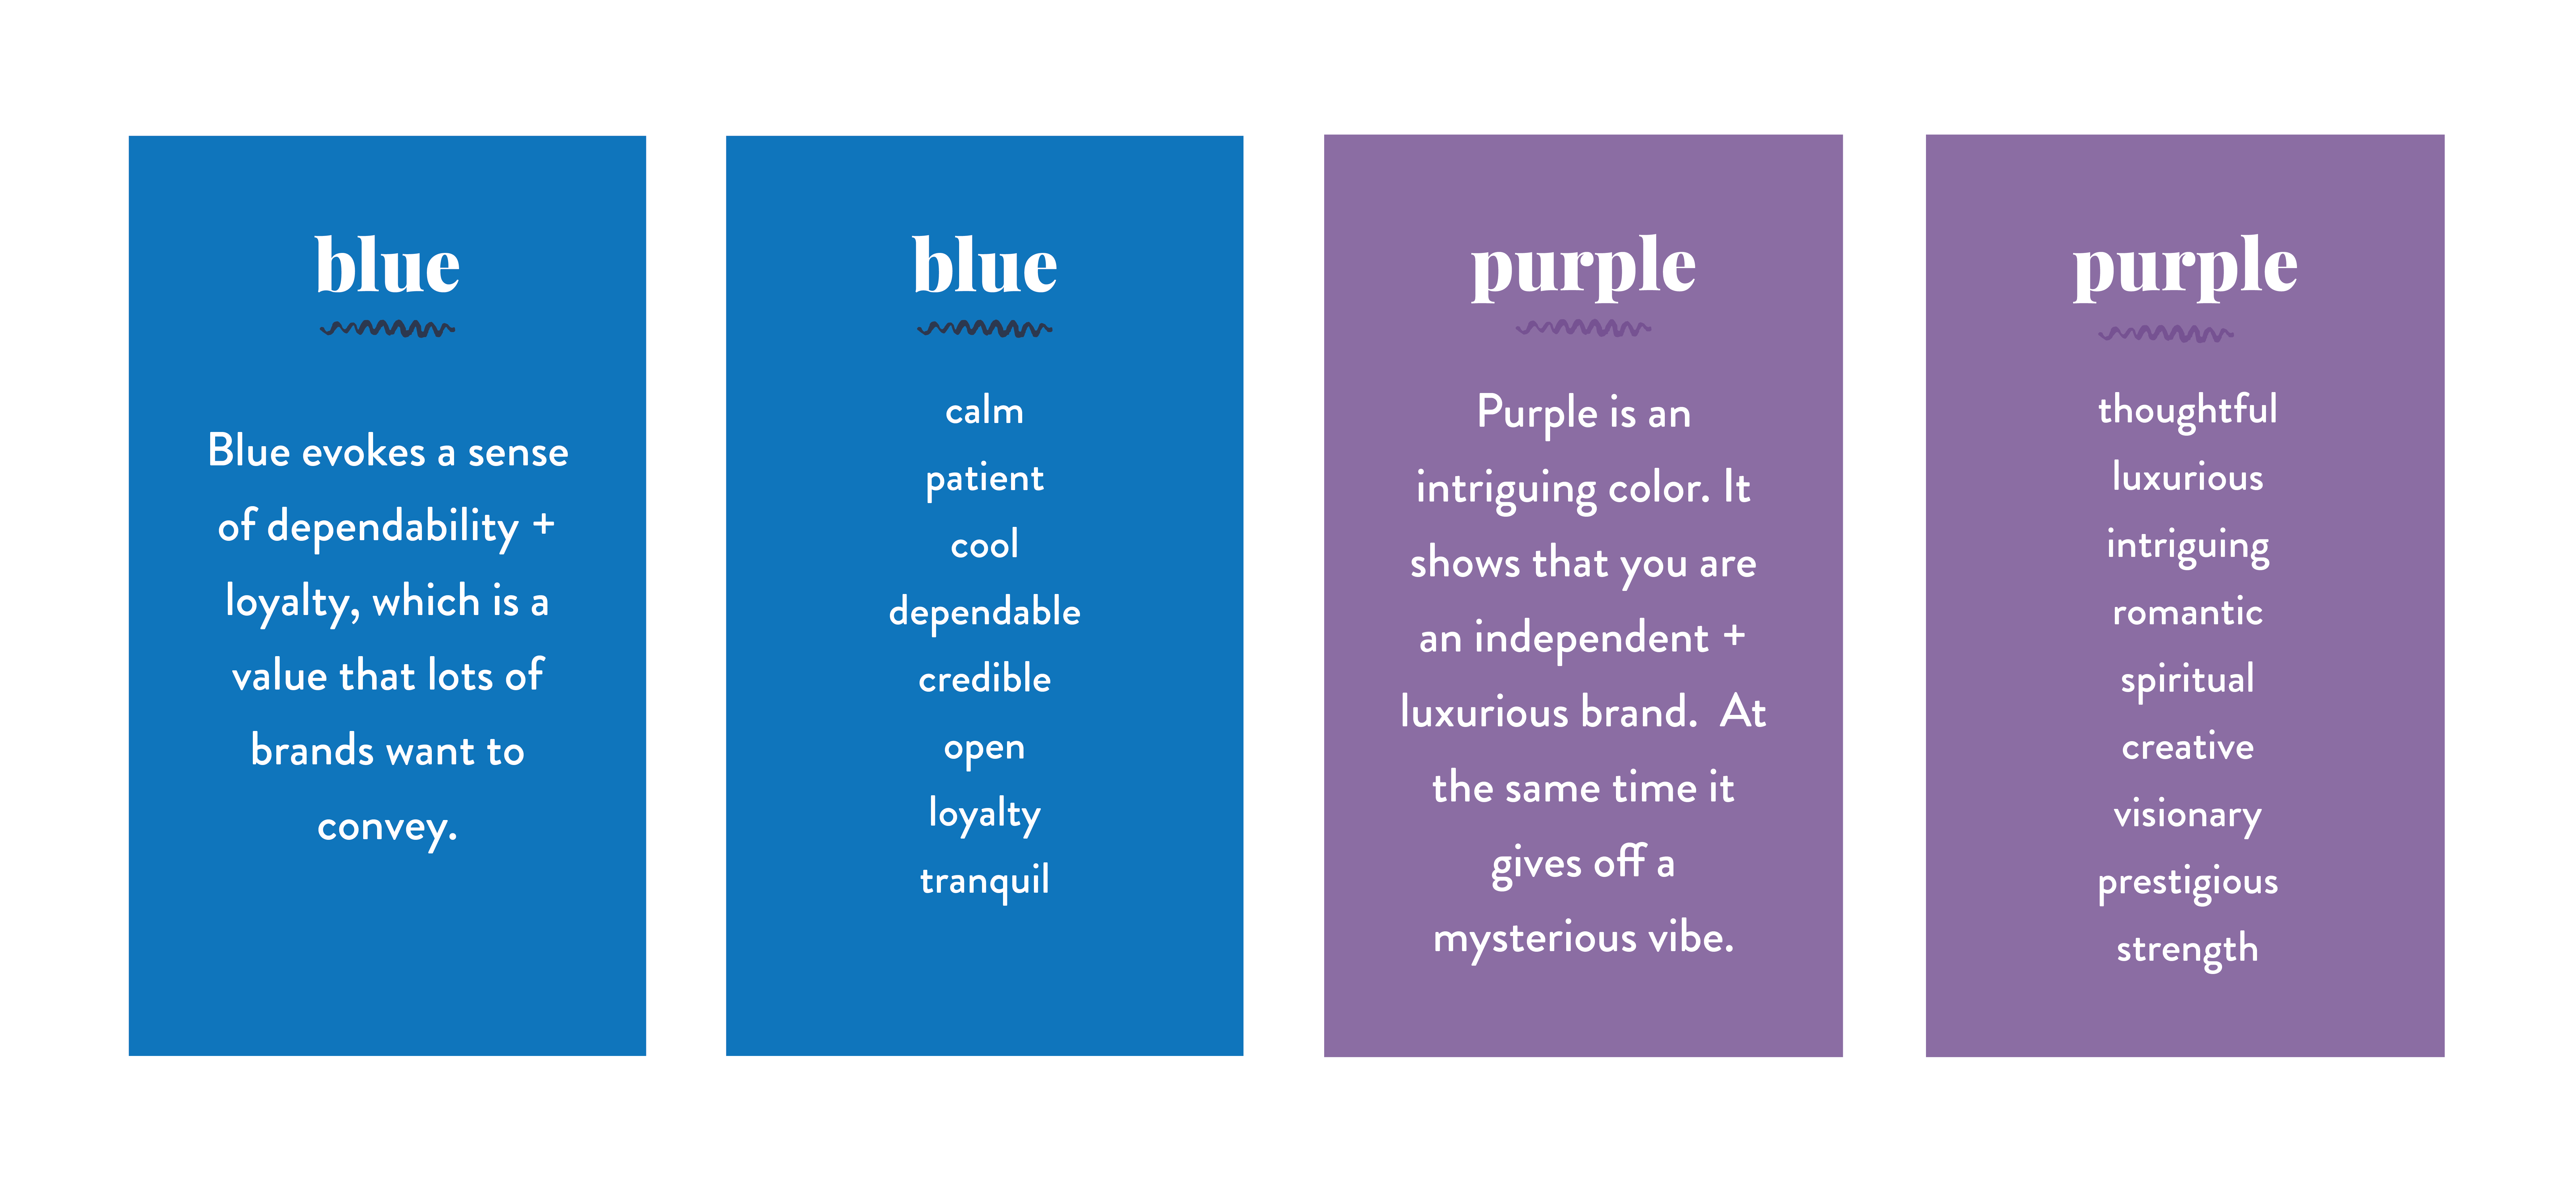 Psychology behind blue and purple